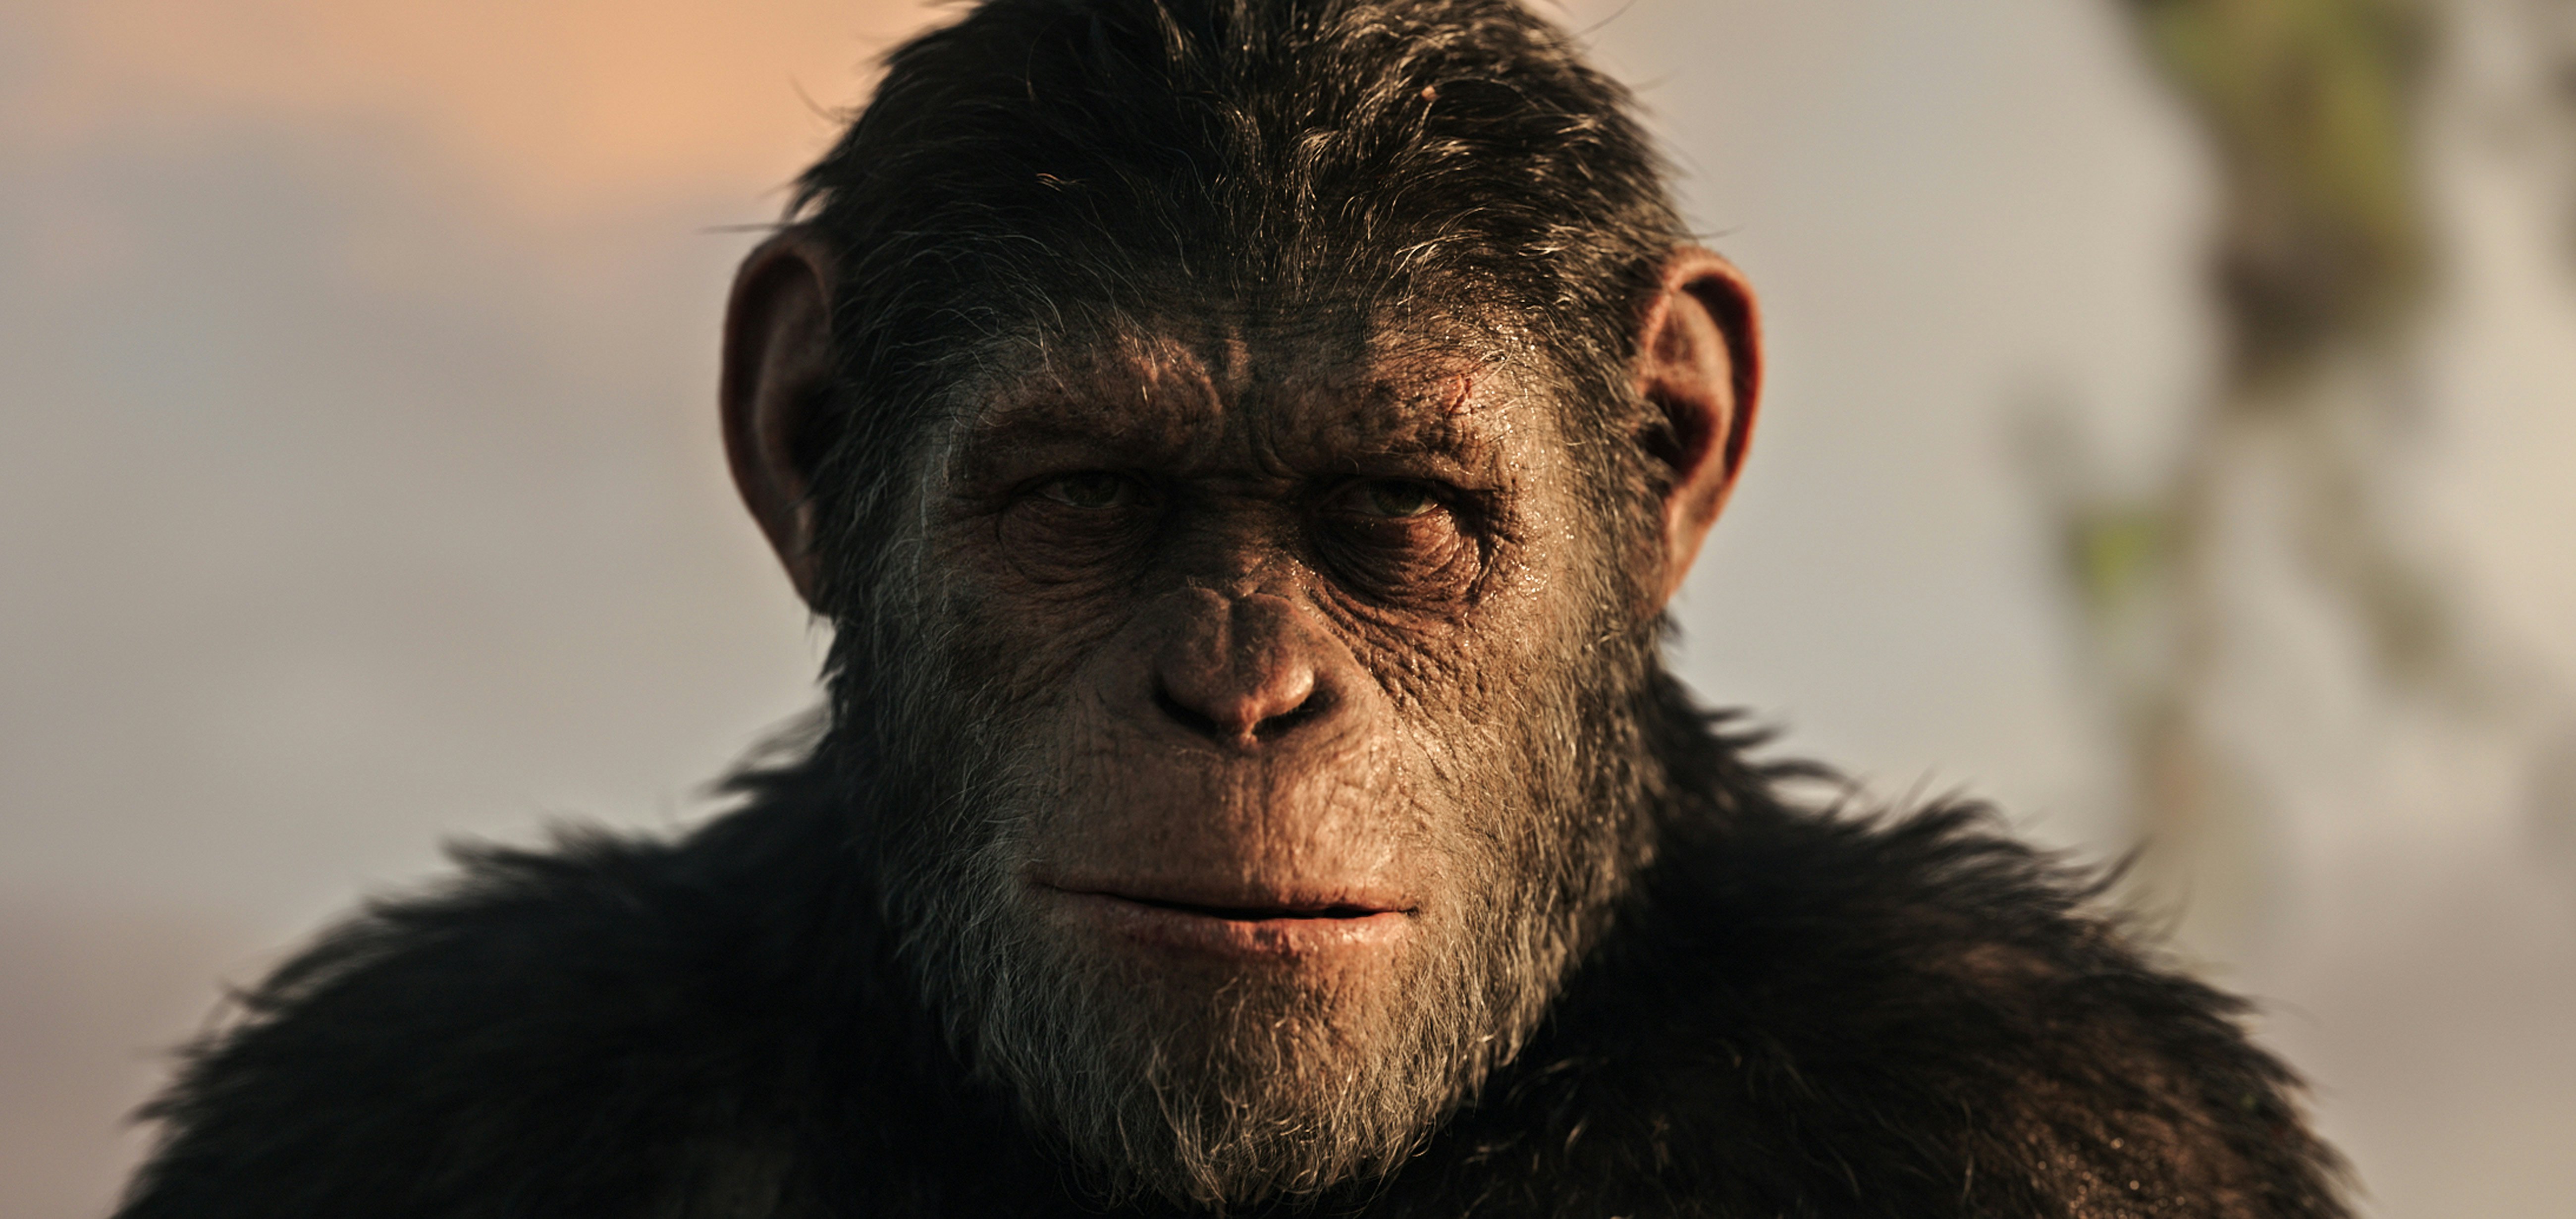 rise of the planet of the apes running time